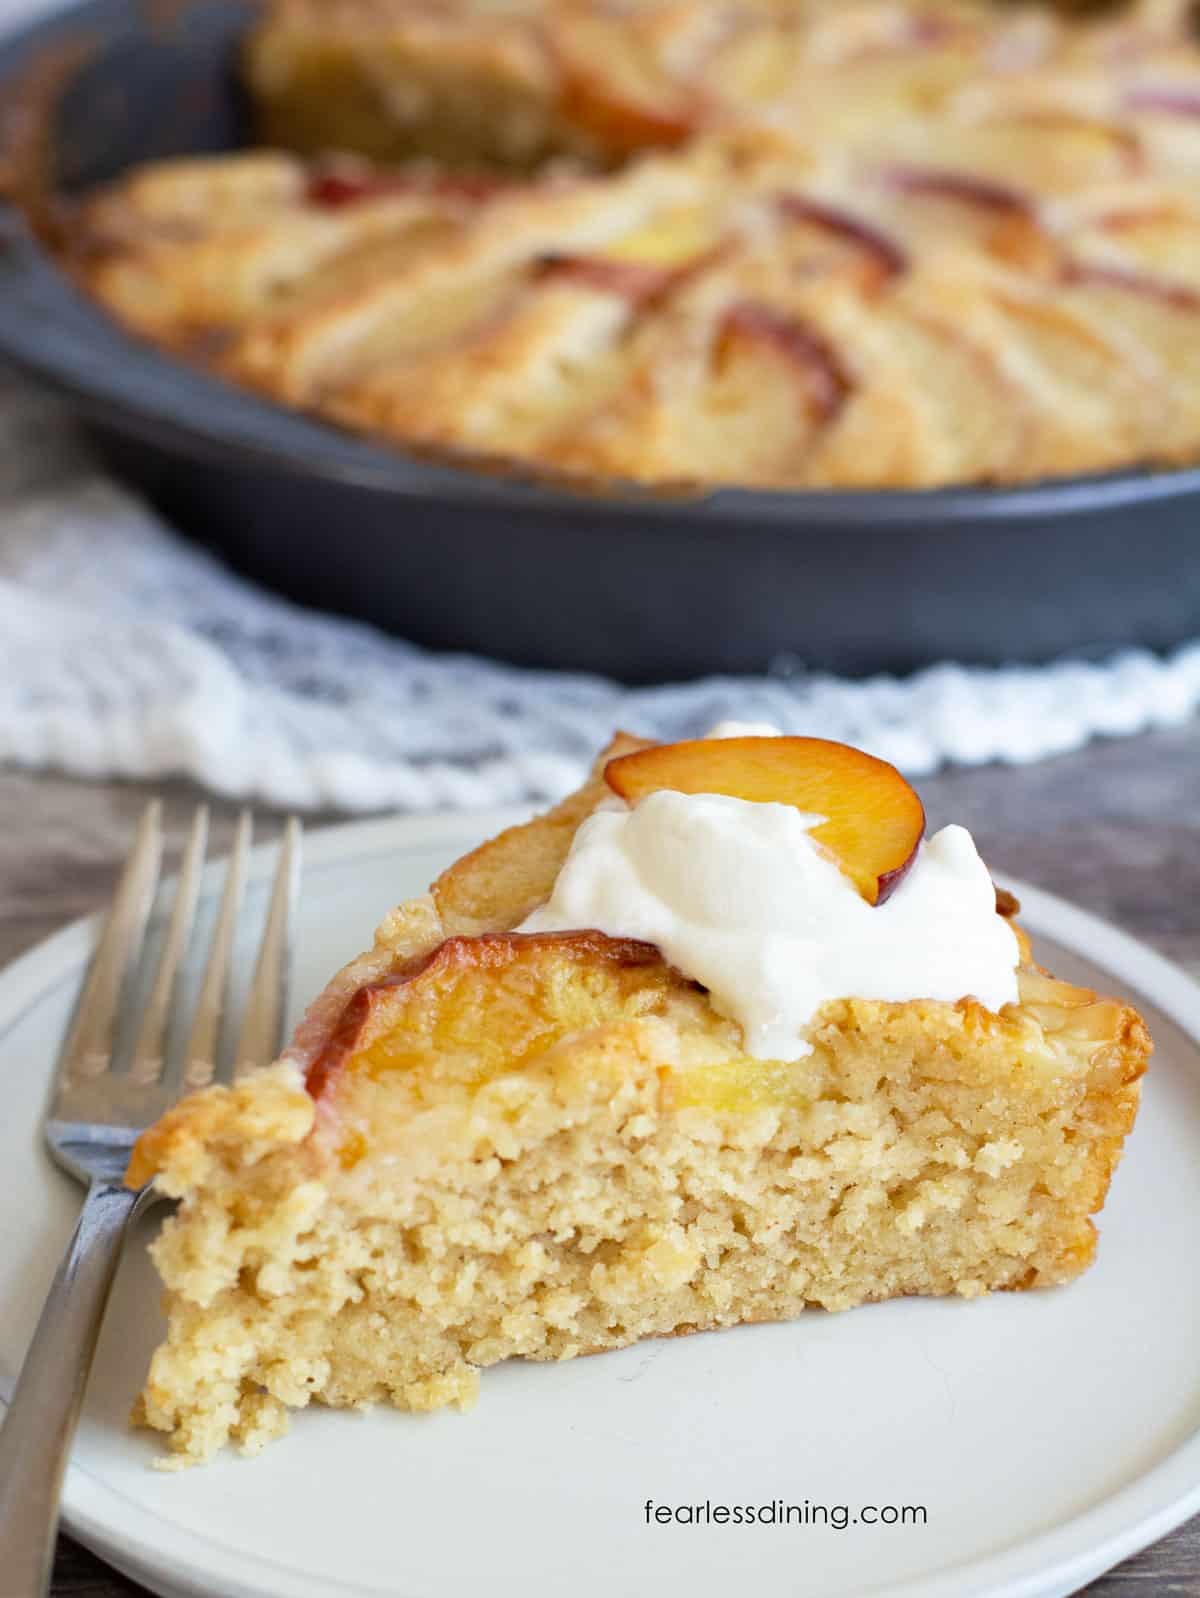 A slice of peach kuchen on a plate. It is topped with some fresh whipped cream.